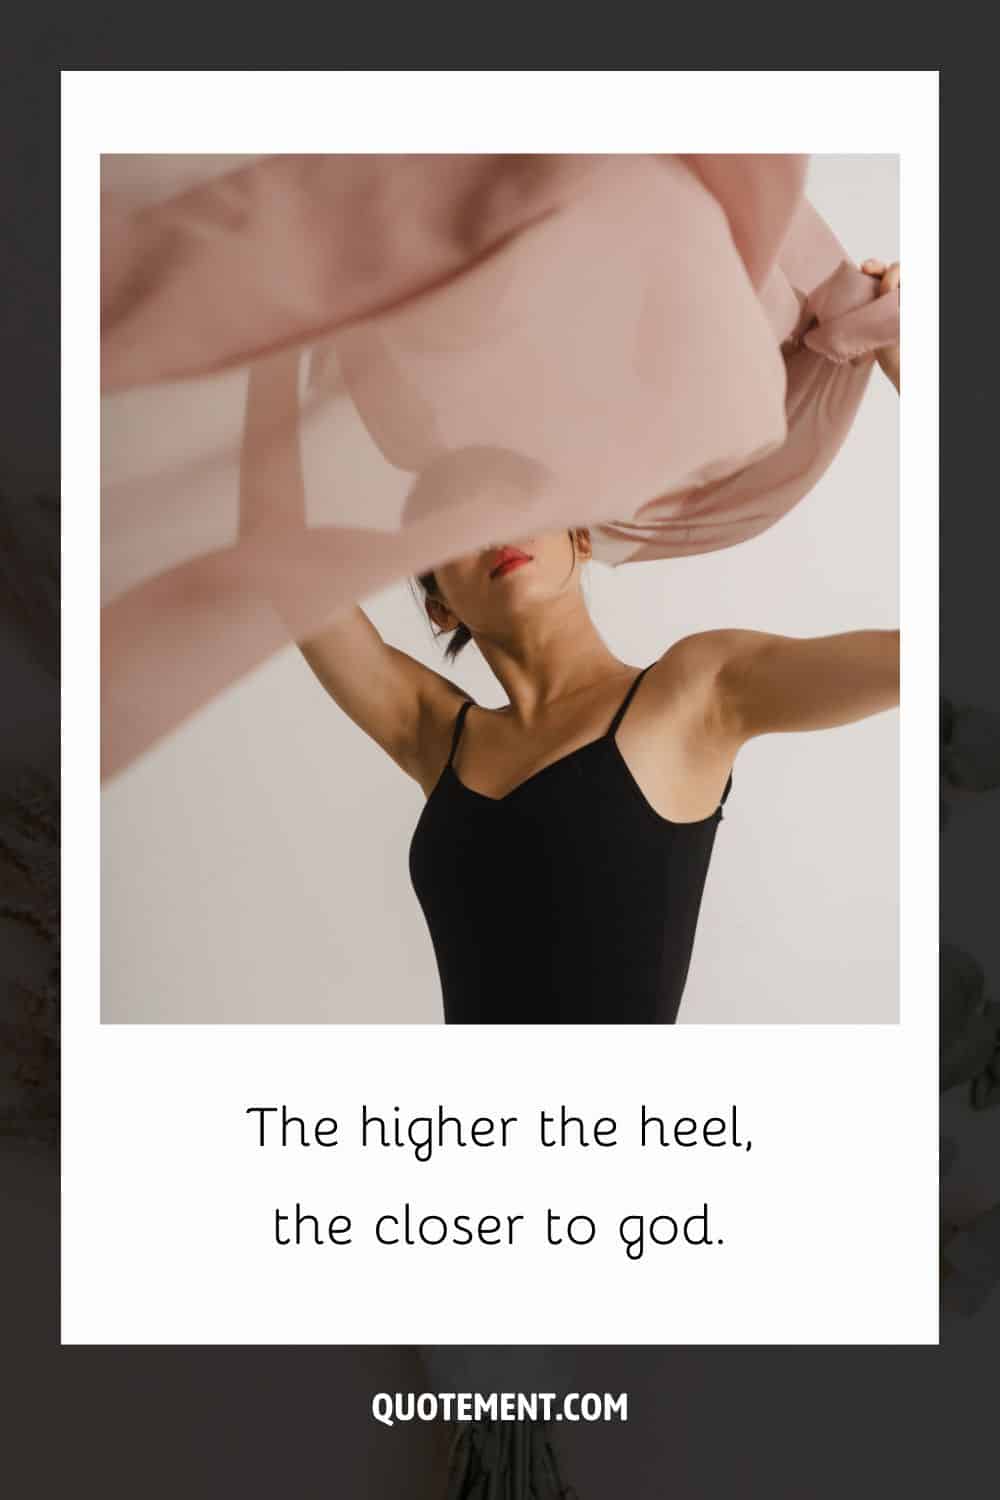 Image of a joyful girl dancing with flowing veil representing dope captions for Instagram.
